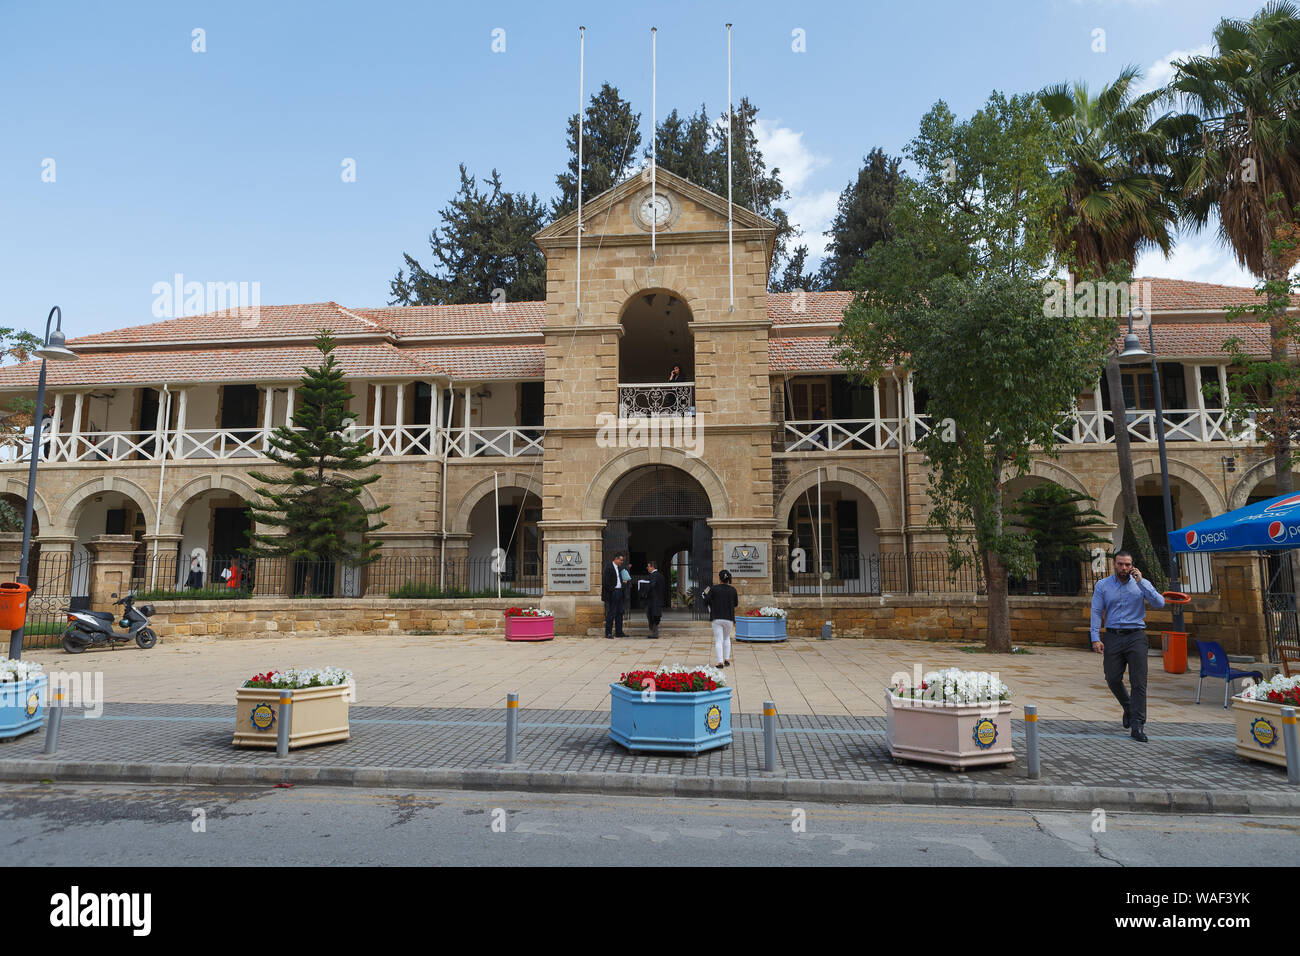 LEFKOSA NIKOSIA, CYPRUS - MARCH, 29, 2018: The Law Courts building is a historic building on the Sarayonu Square. Stock Photo